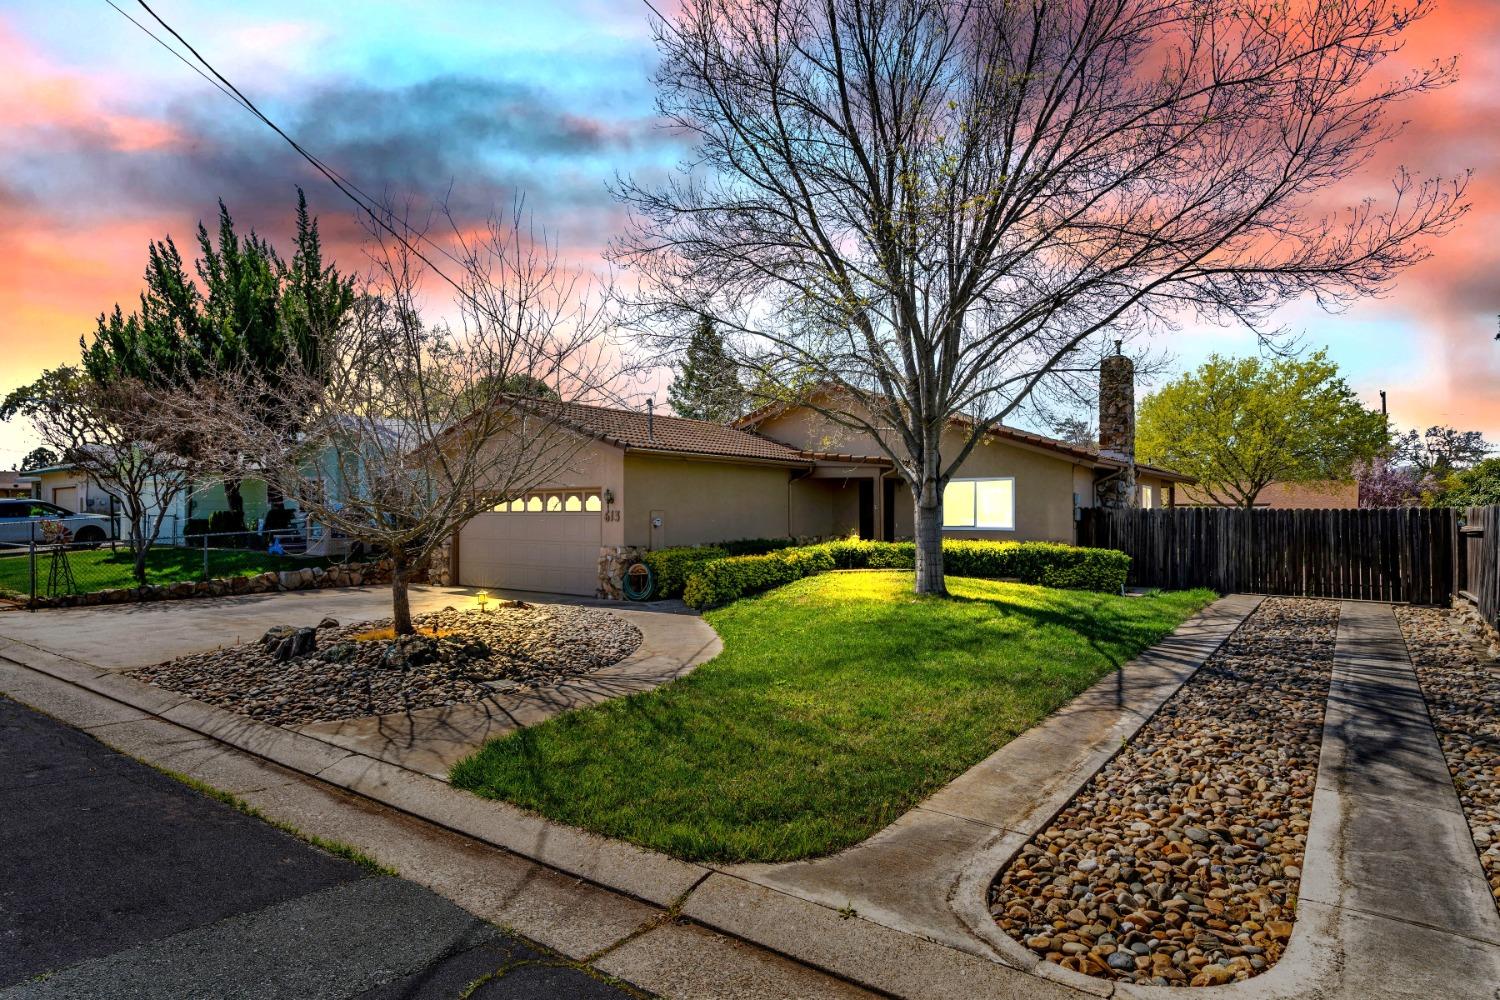 Photo of 613 Nuner Dr in Ione, CA